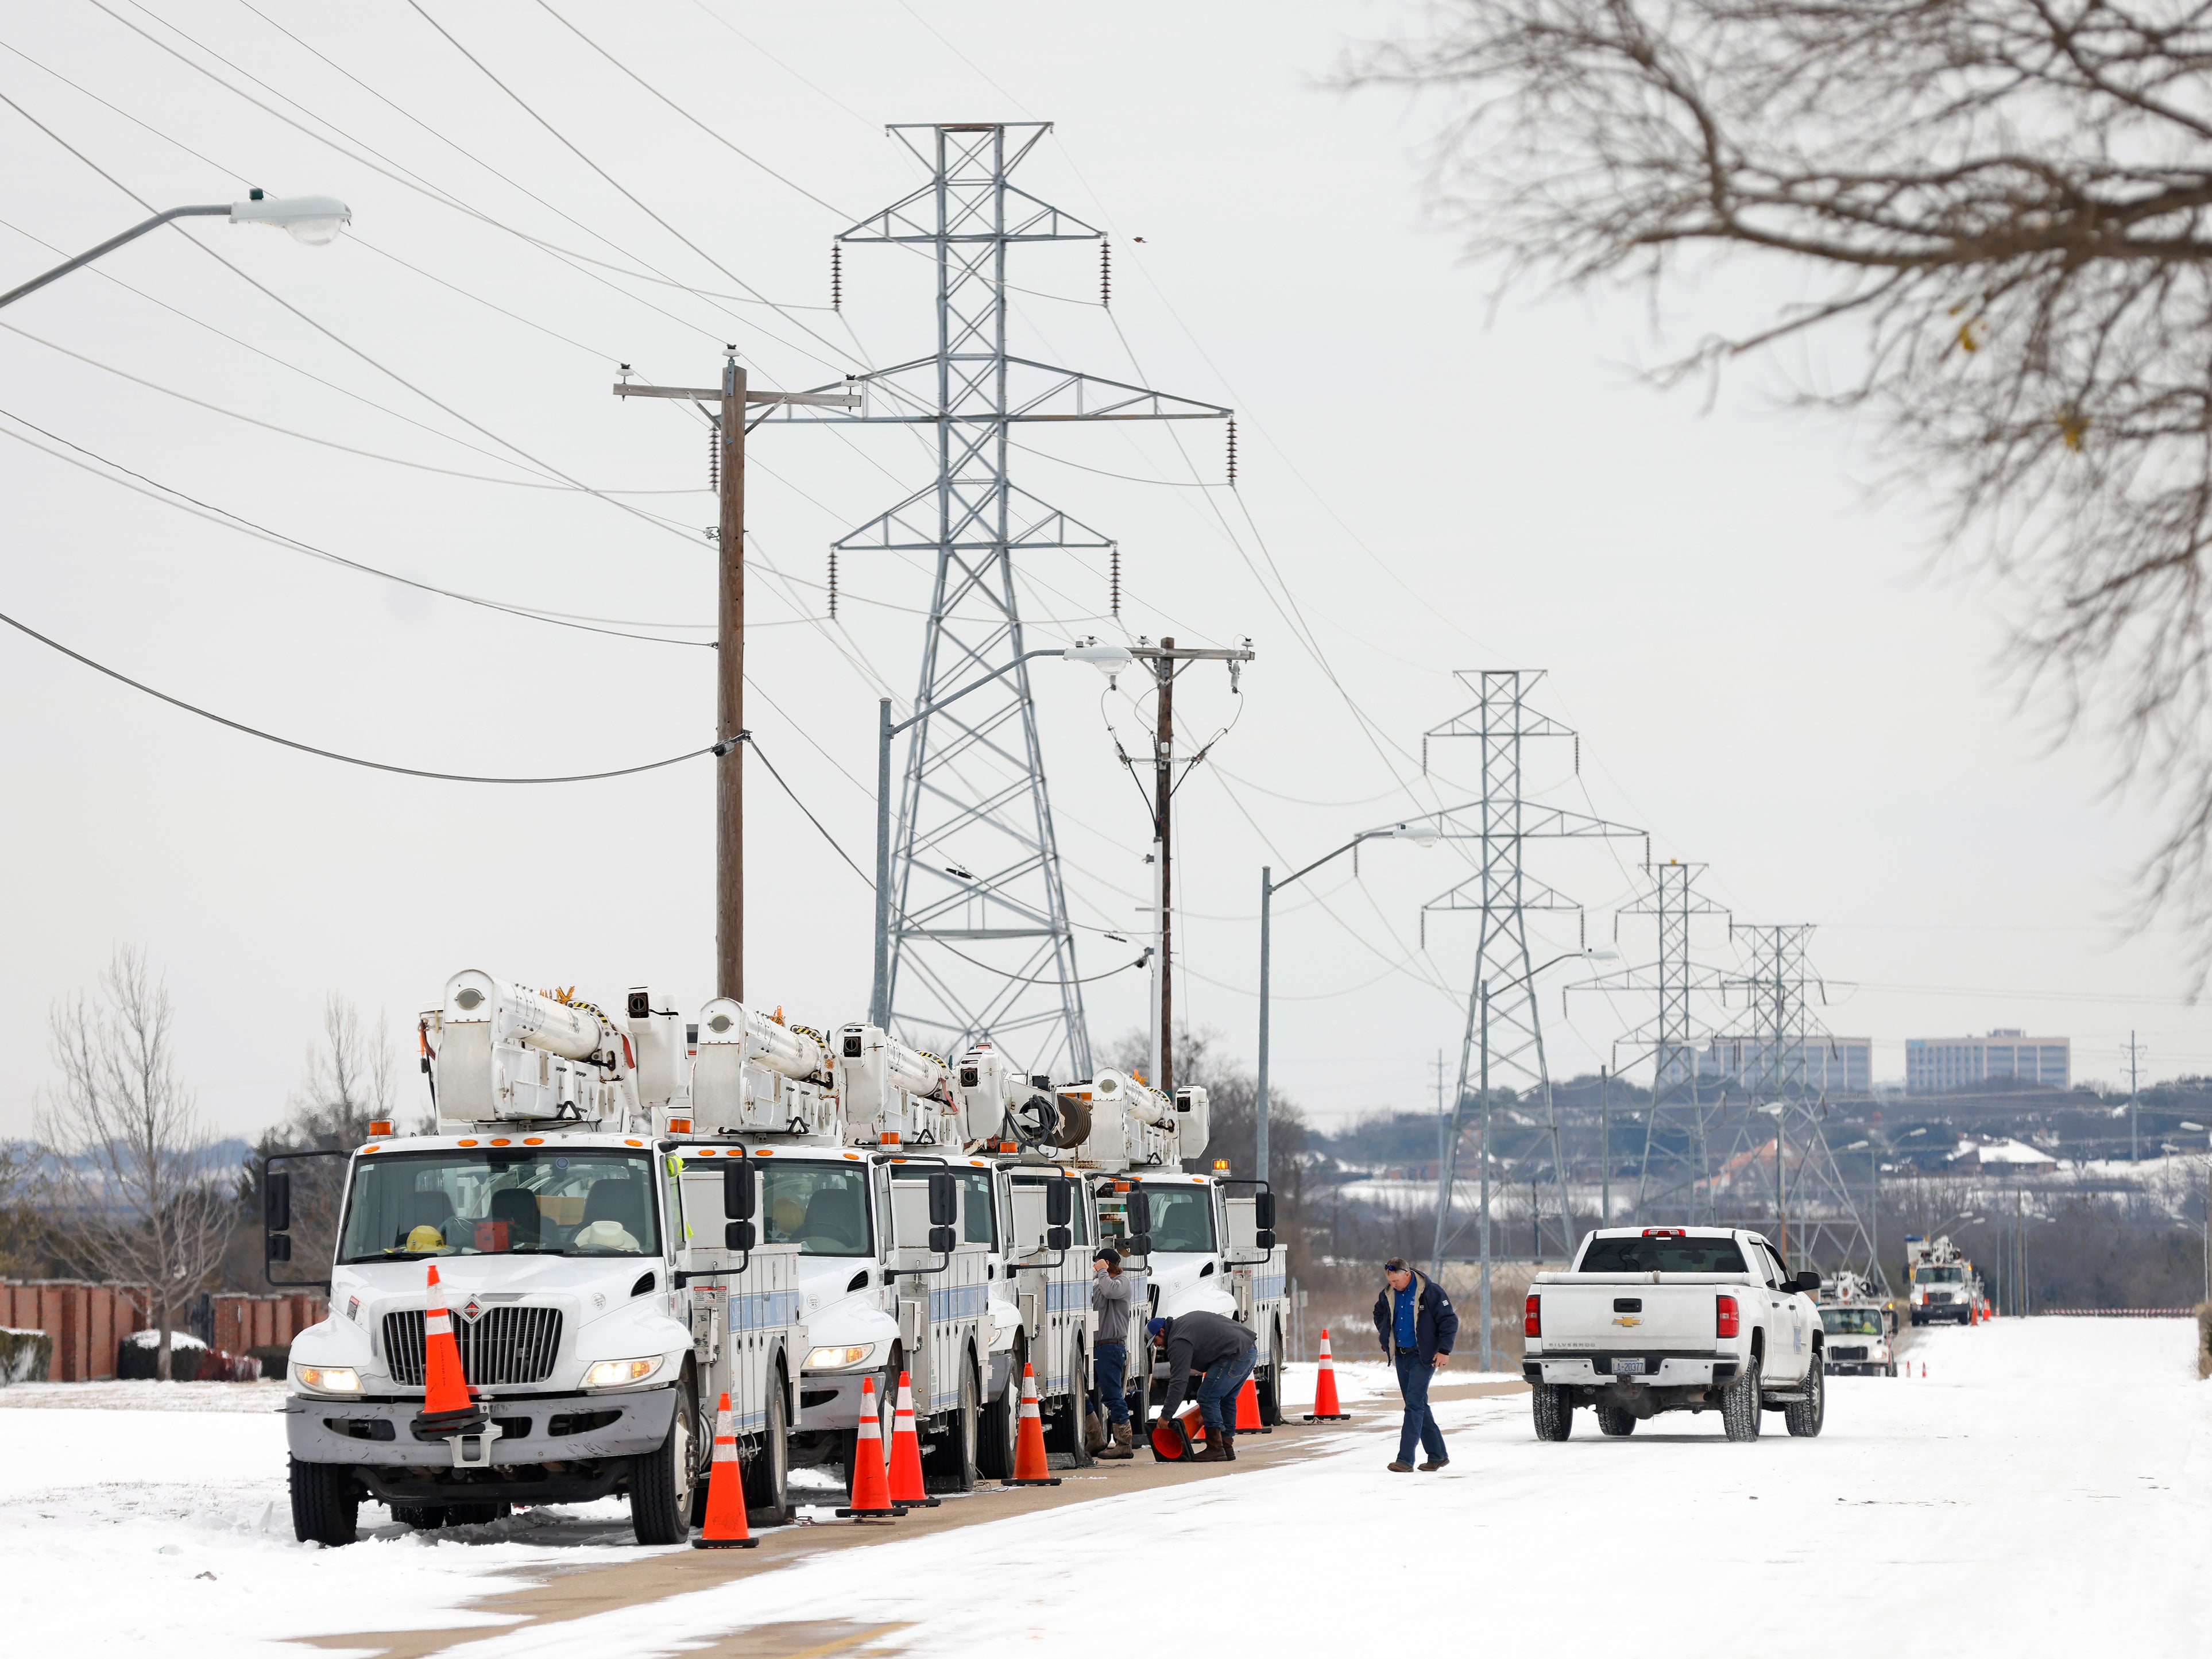 Pike Electric service trucks line up after a snow storm on 16 February, 2021 in Fort Worth, Texas